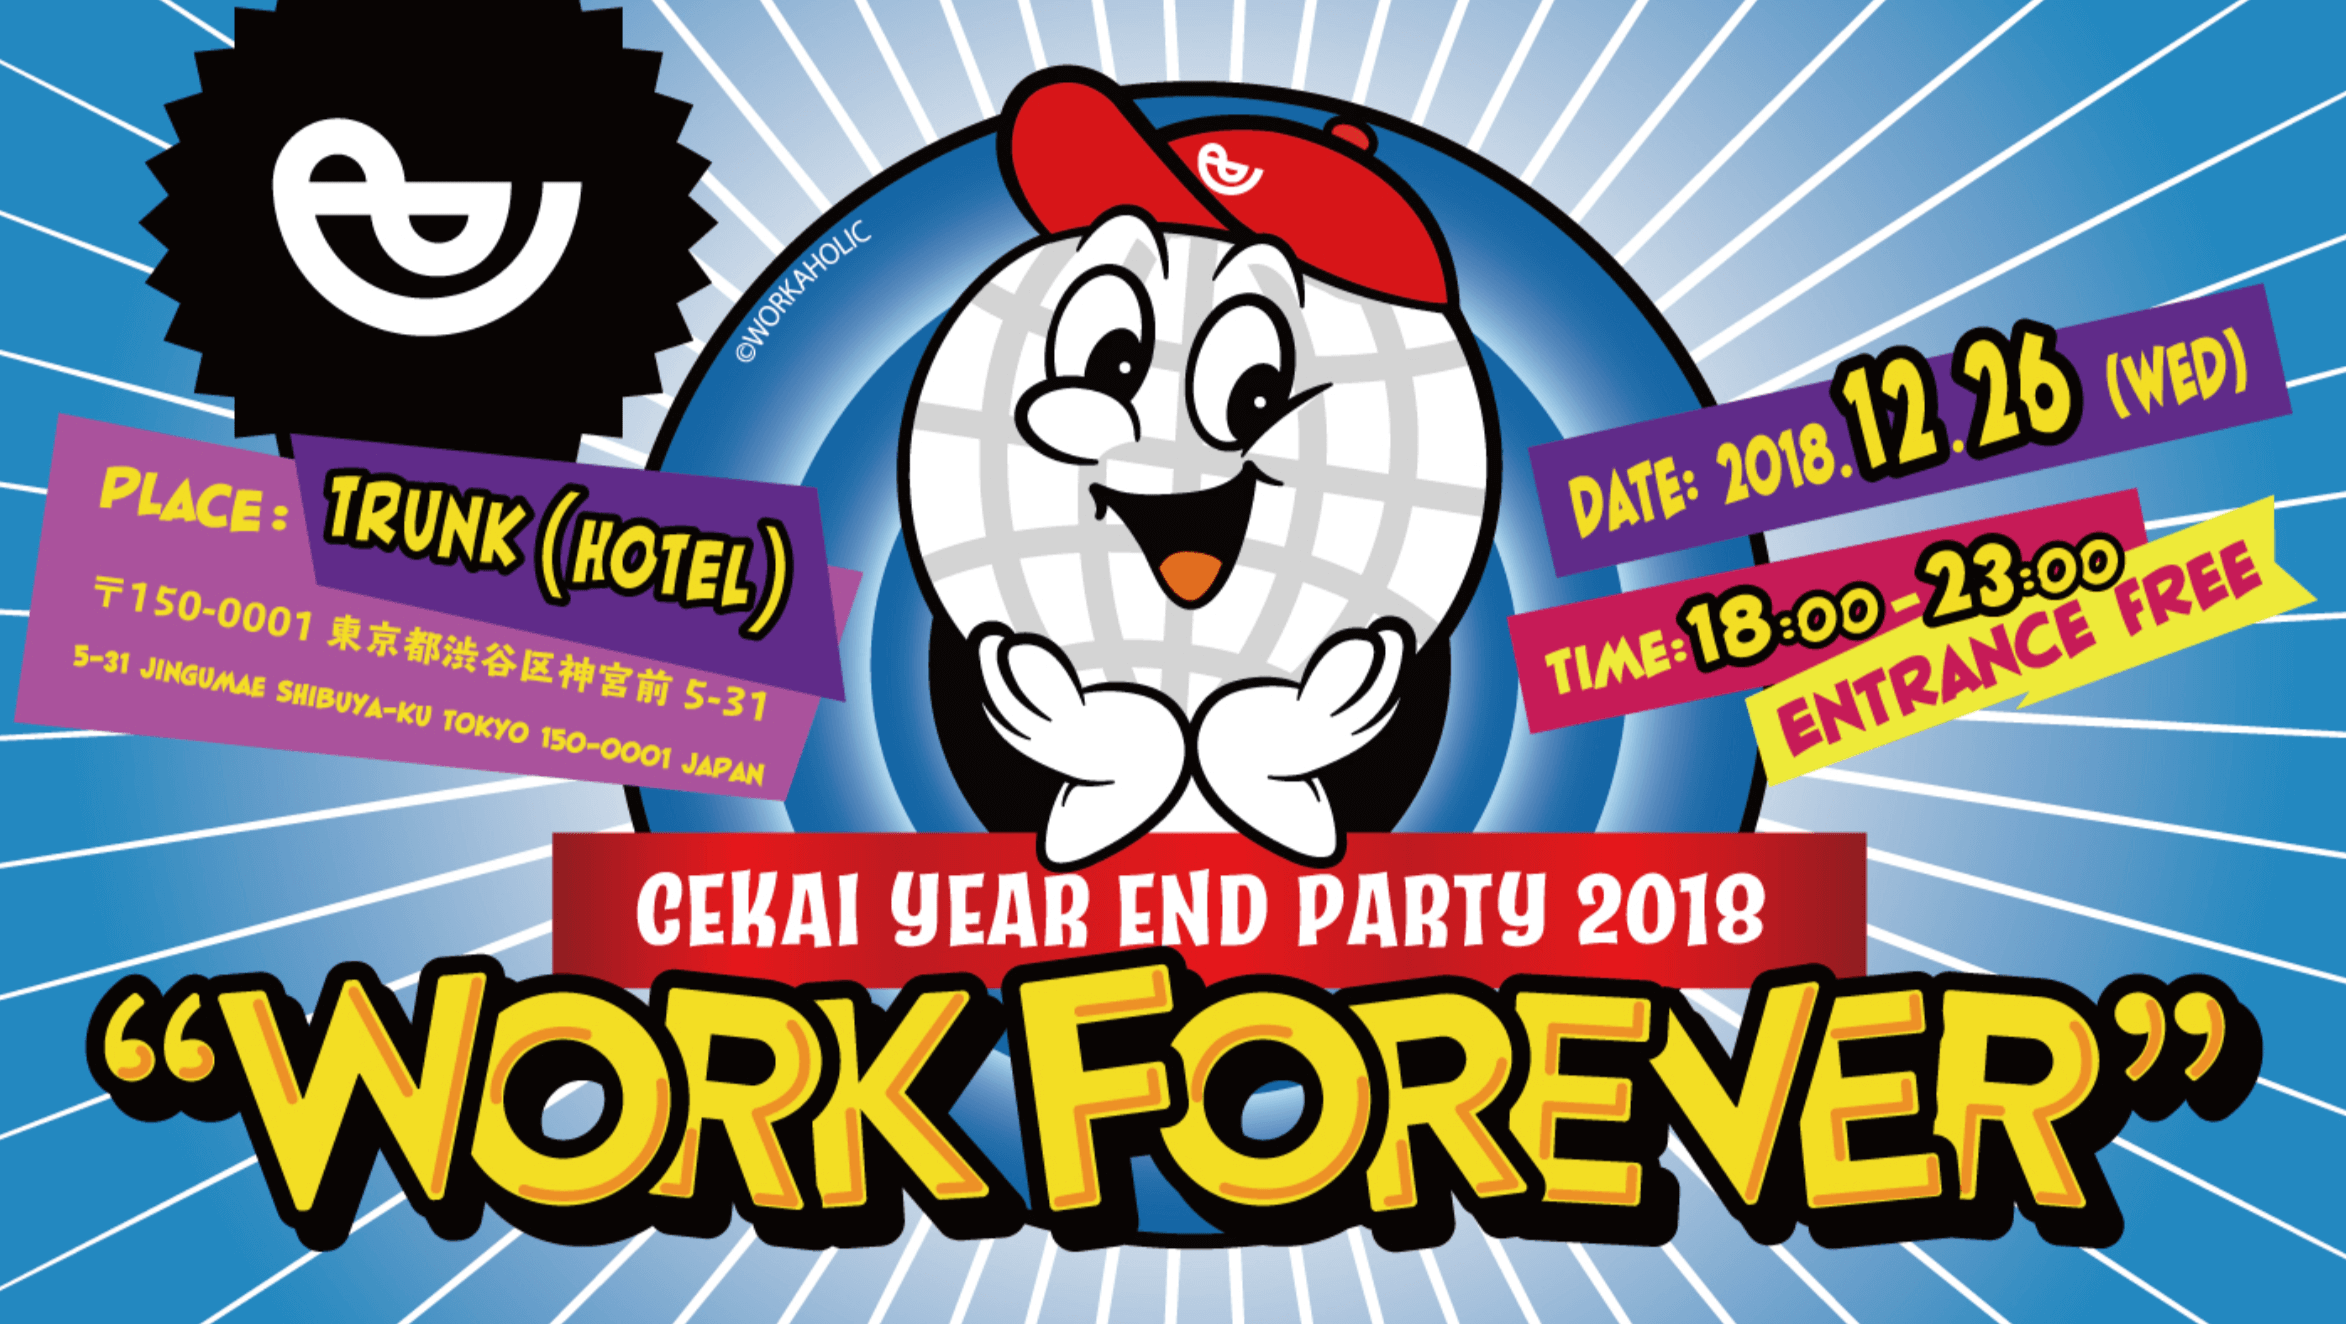 CEKAI YEAR END PARTY 2018「WORK FOREVER」